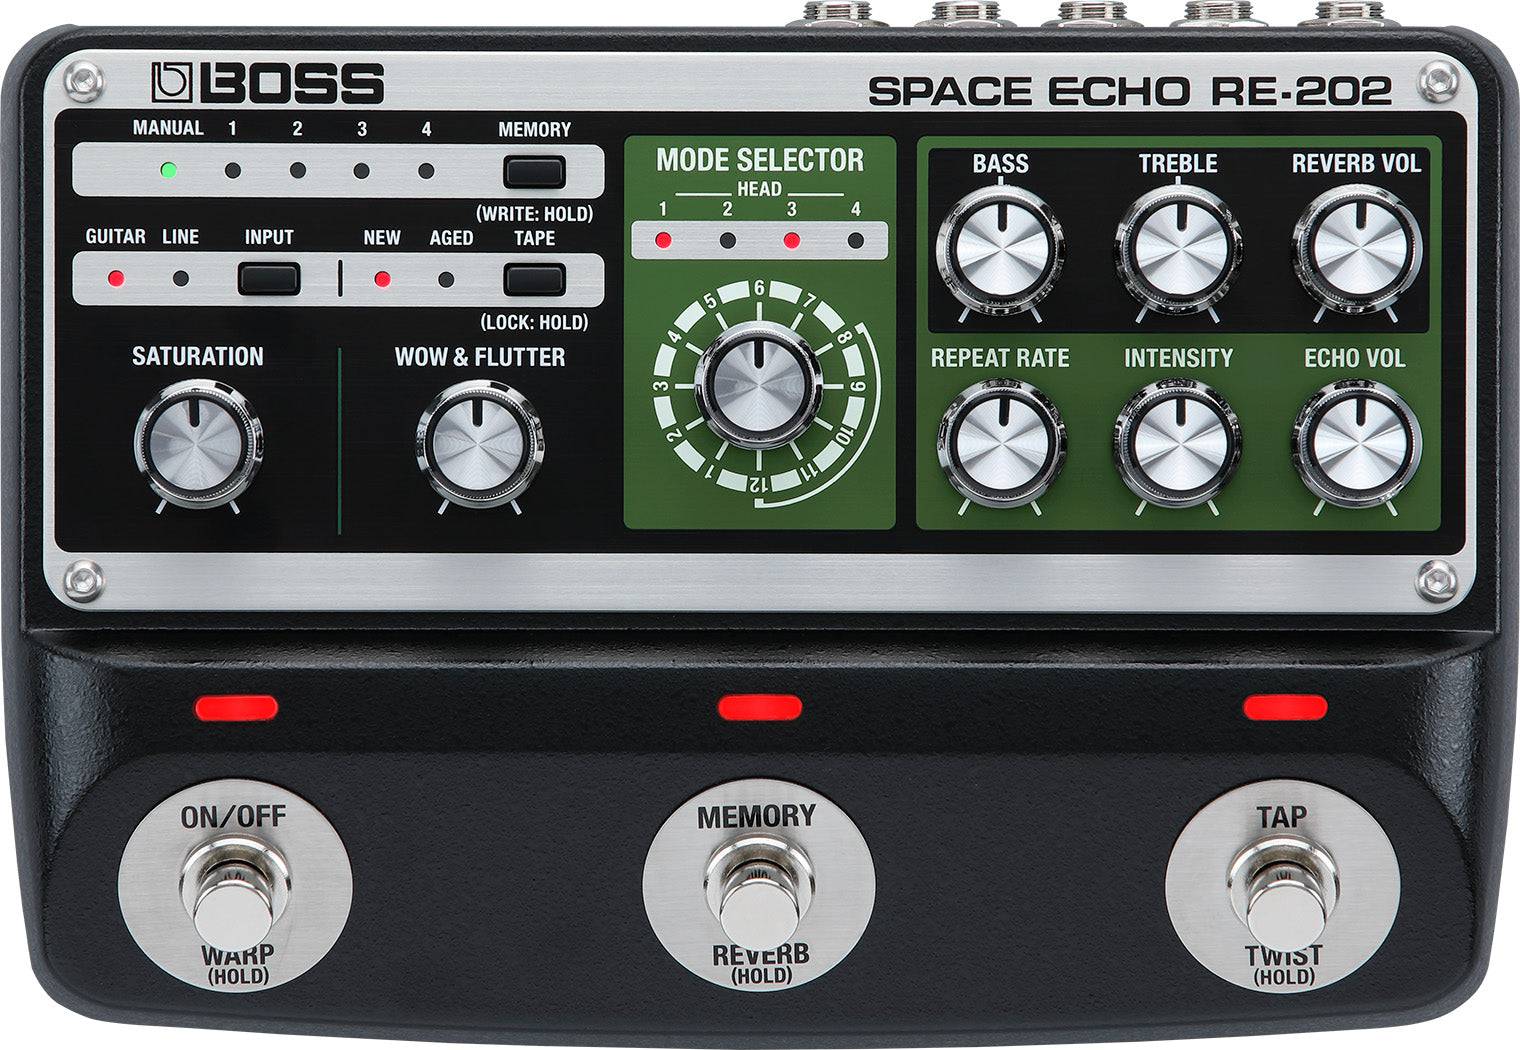 BOSS RE202 SPACE ECHO EFFECTS PEDAL - Joondalup Music Centre